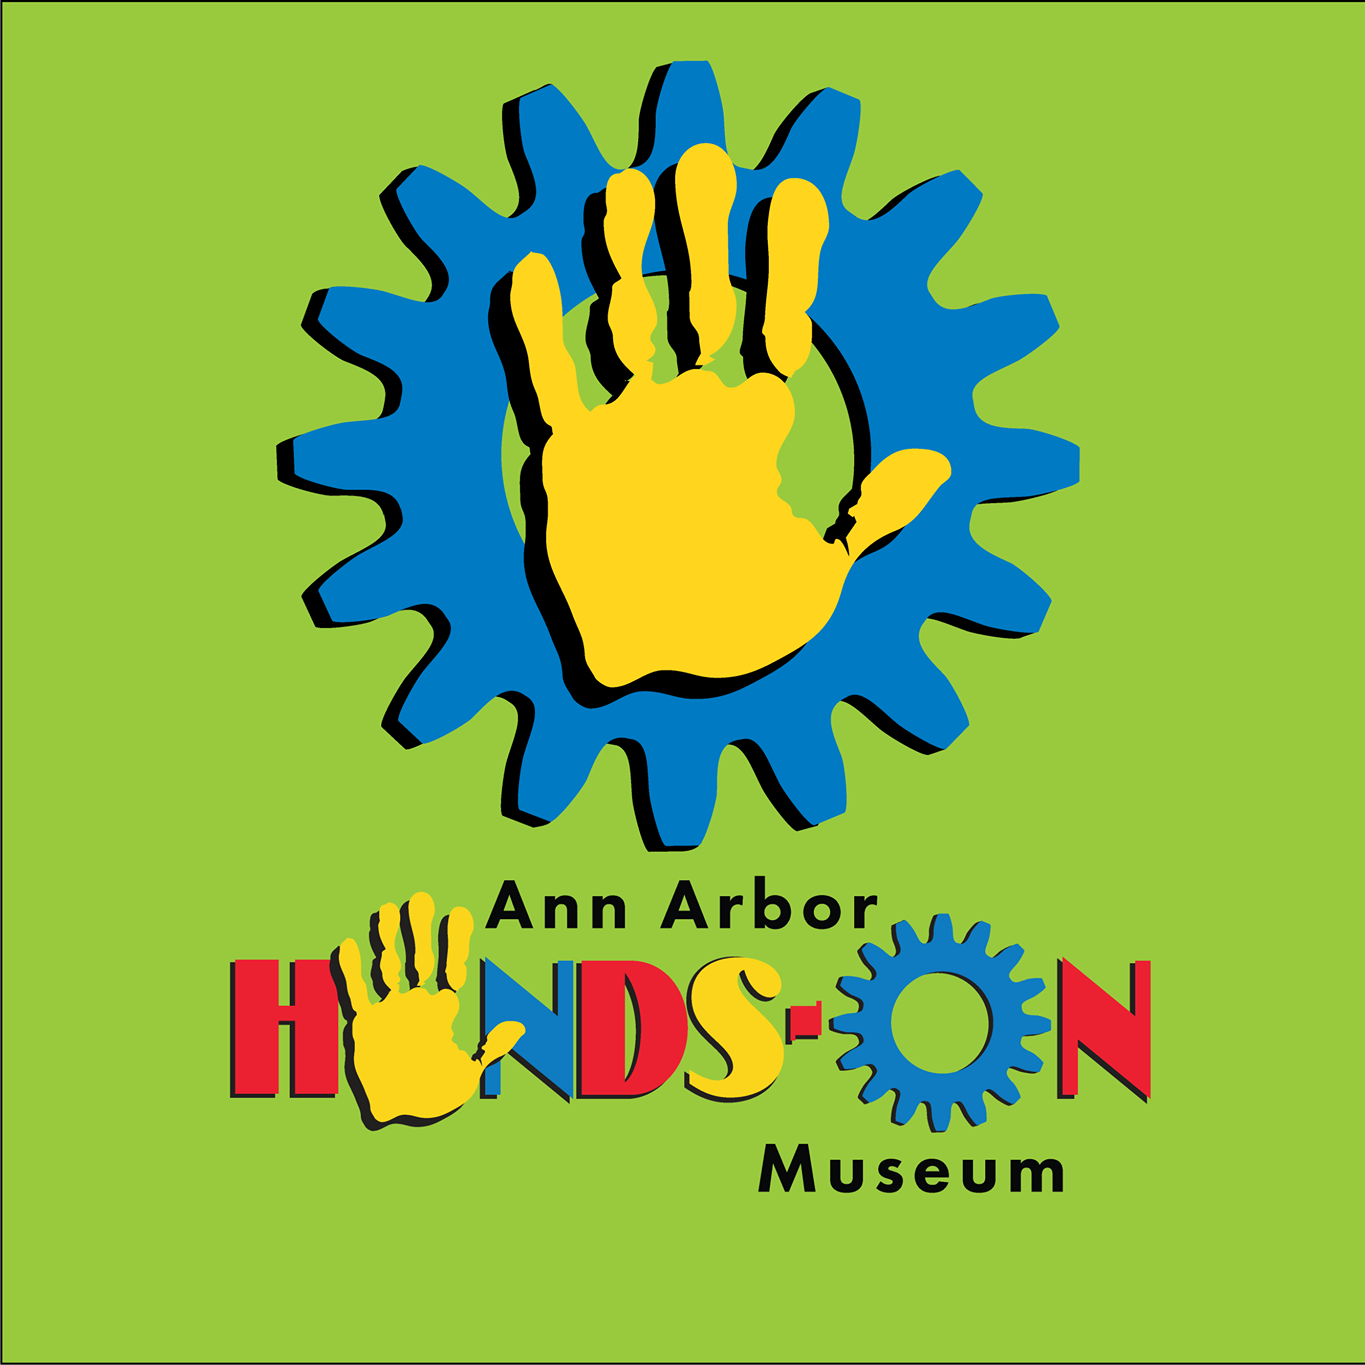 Ann Arbor Hands-On Museum|Museums|Travel